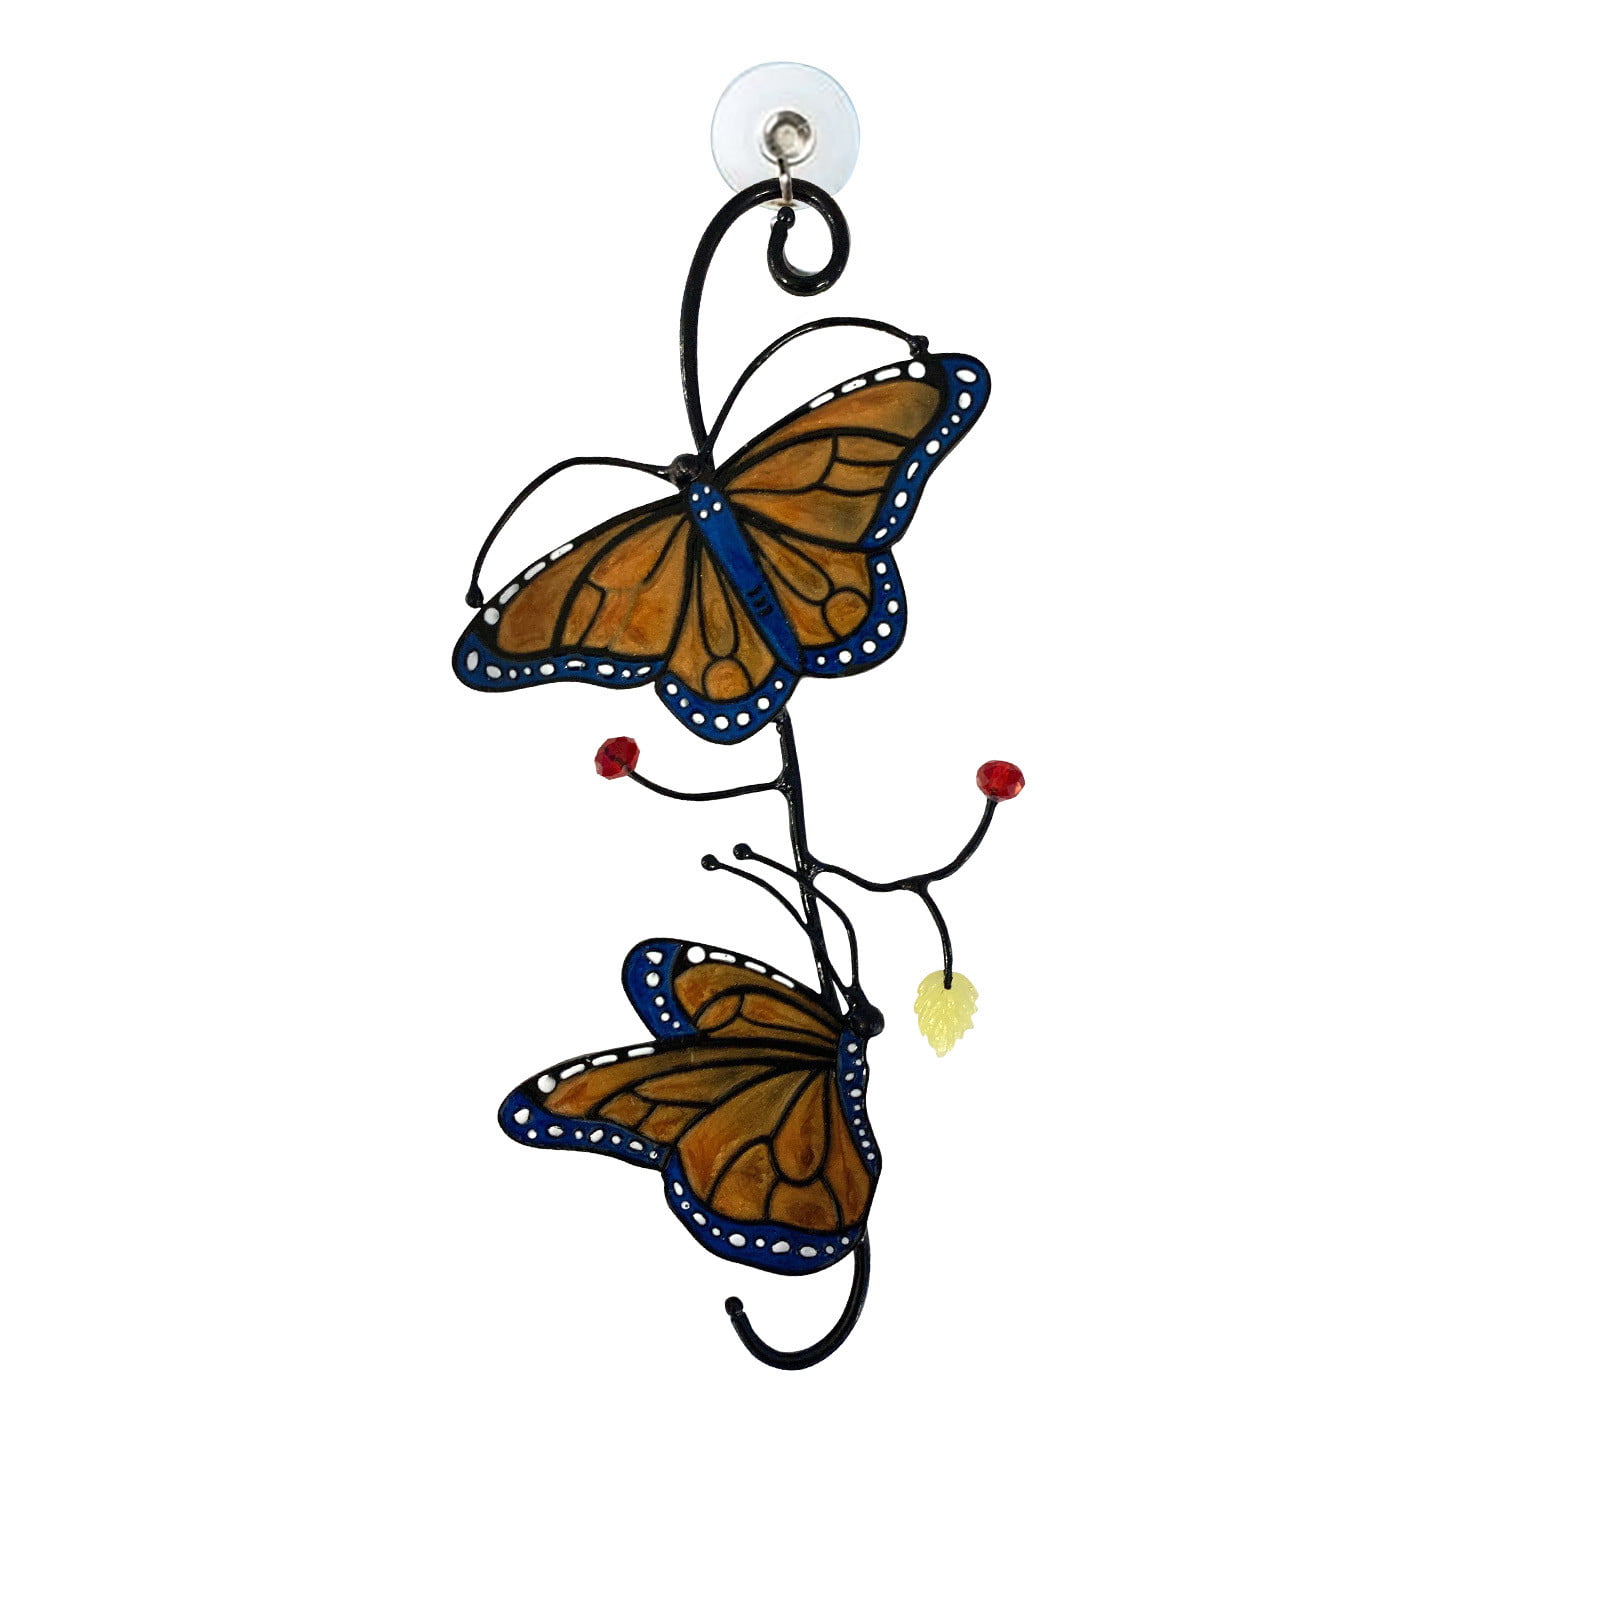 Details about   Handmade Crystal Ball Suncatcher Butterfly Ornaments Hanging Home Pendant Decor 